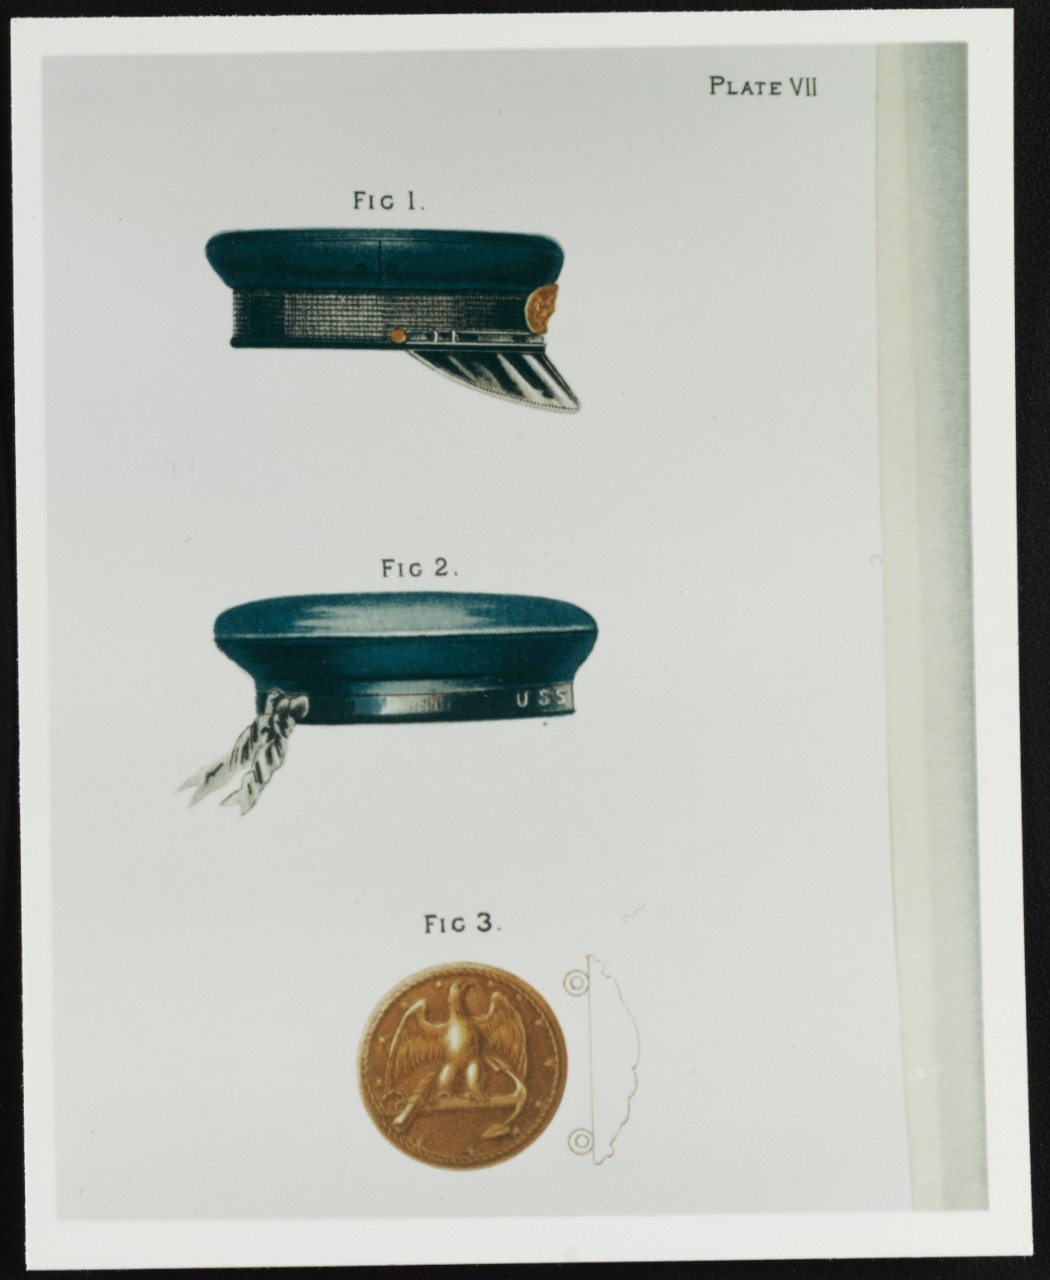 Hats and Caps for Petty Officers First Class. U.S. Naval Uniform Regulations 1886